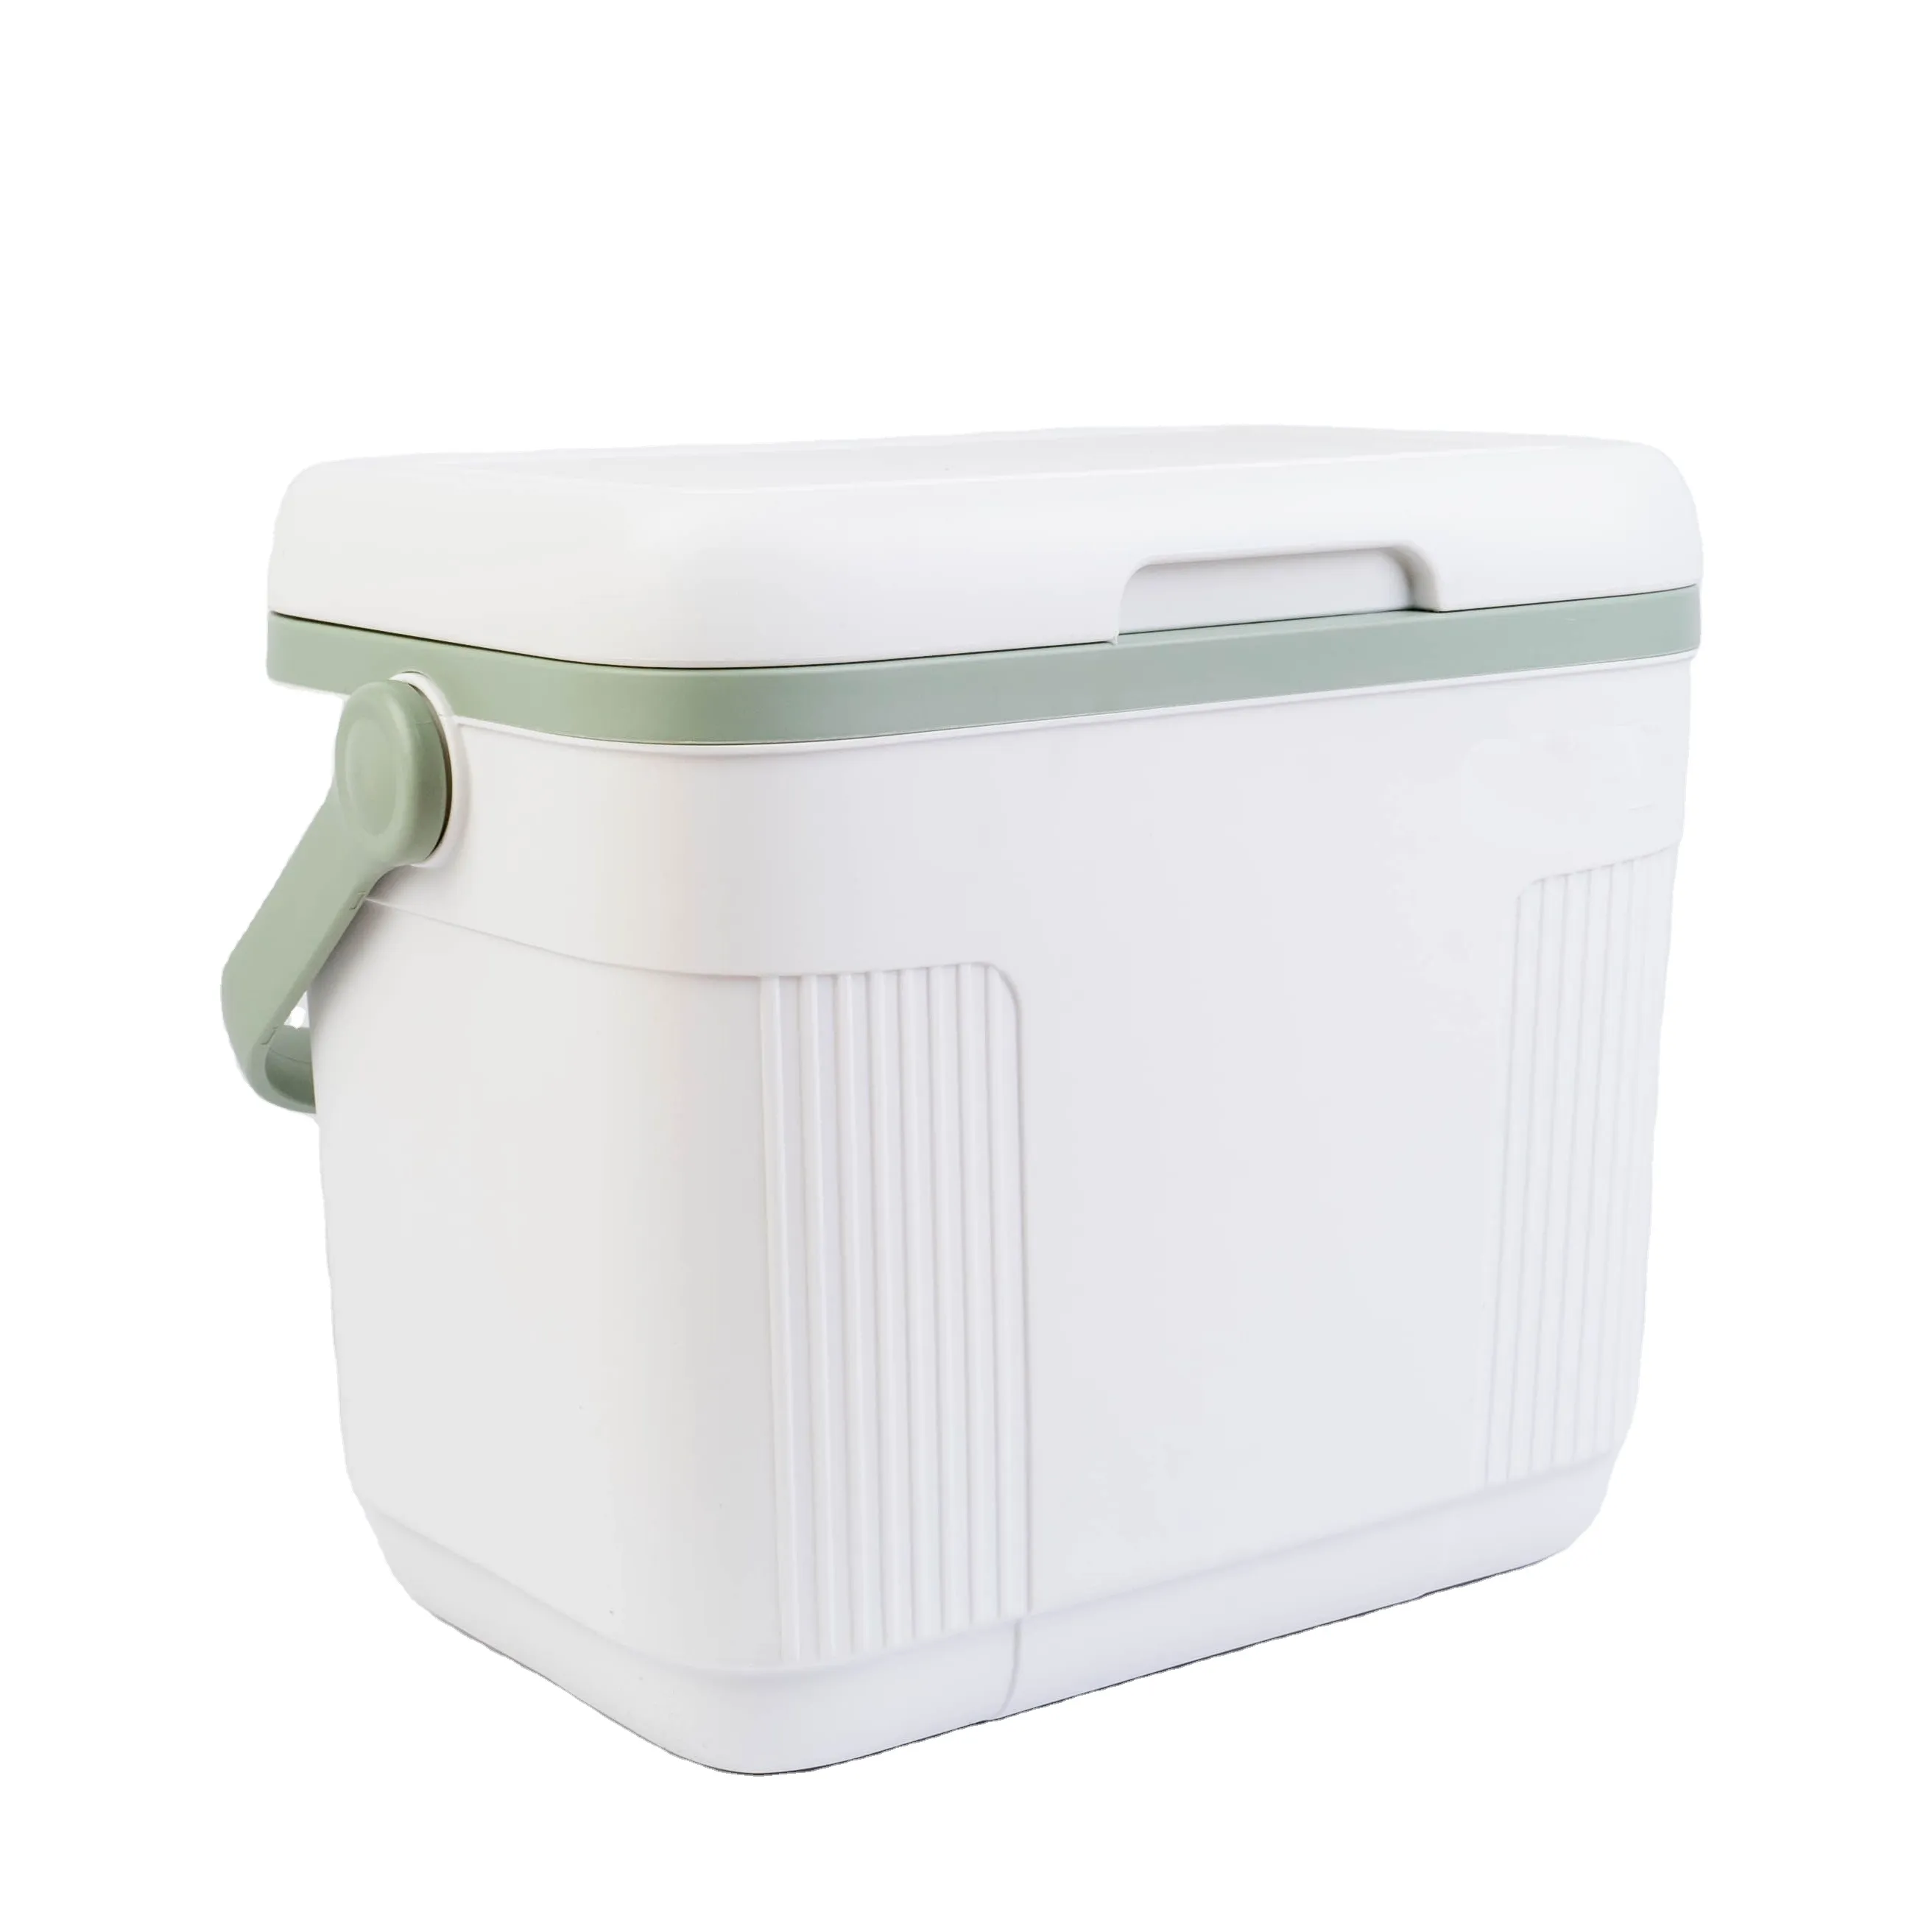 22L Trips PU Foaming Body Lunch Cooler Box Provides Up to 2 Days for Office Work School Picnic Beach